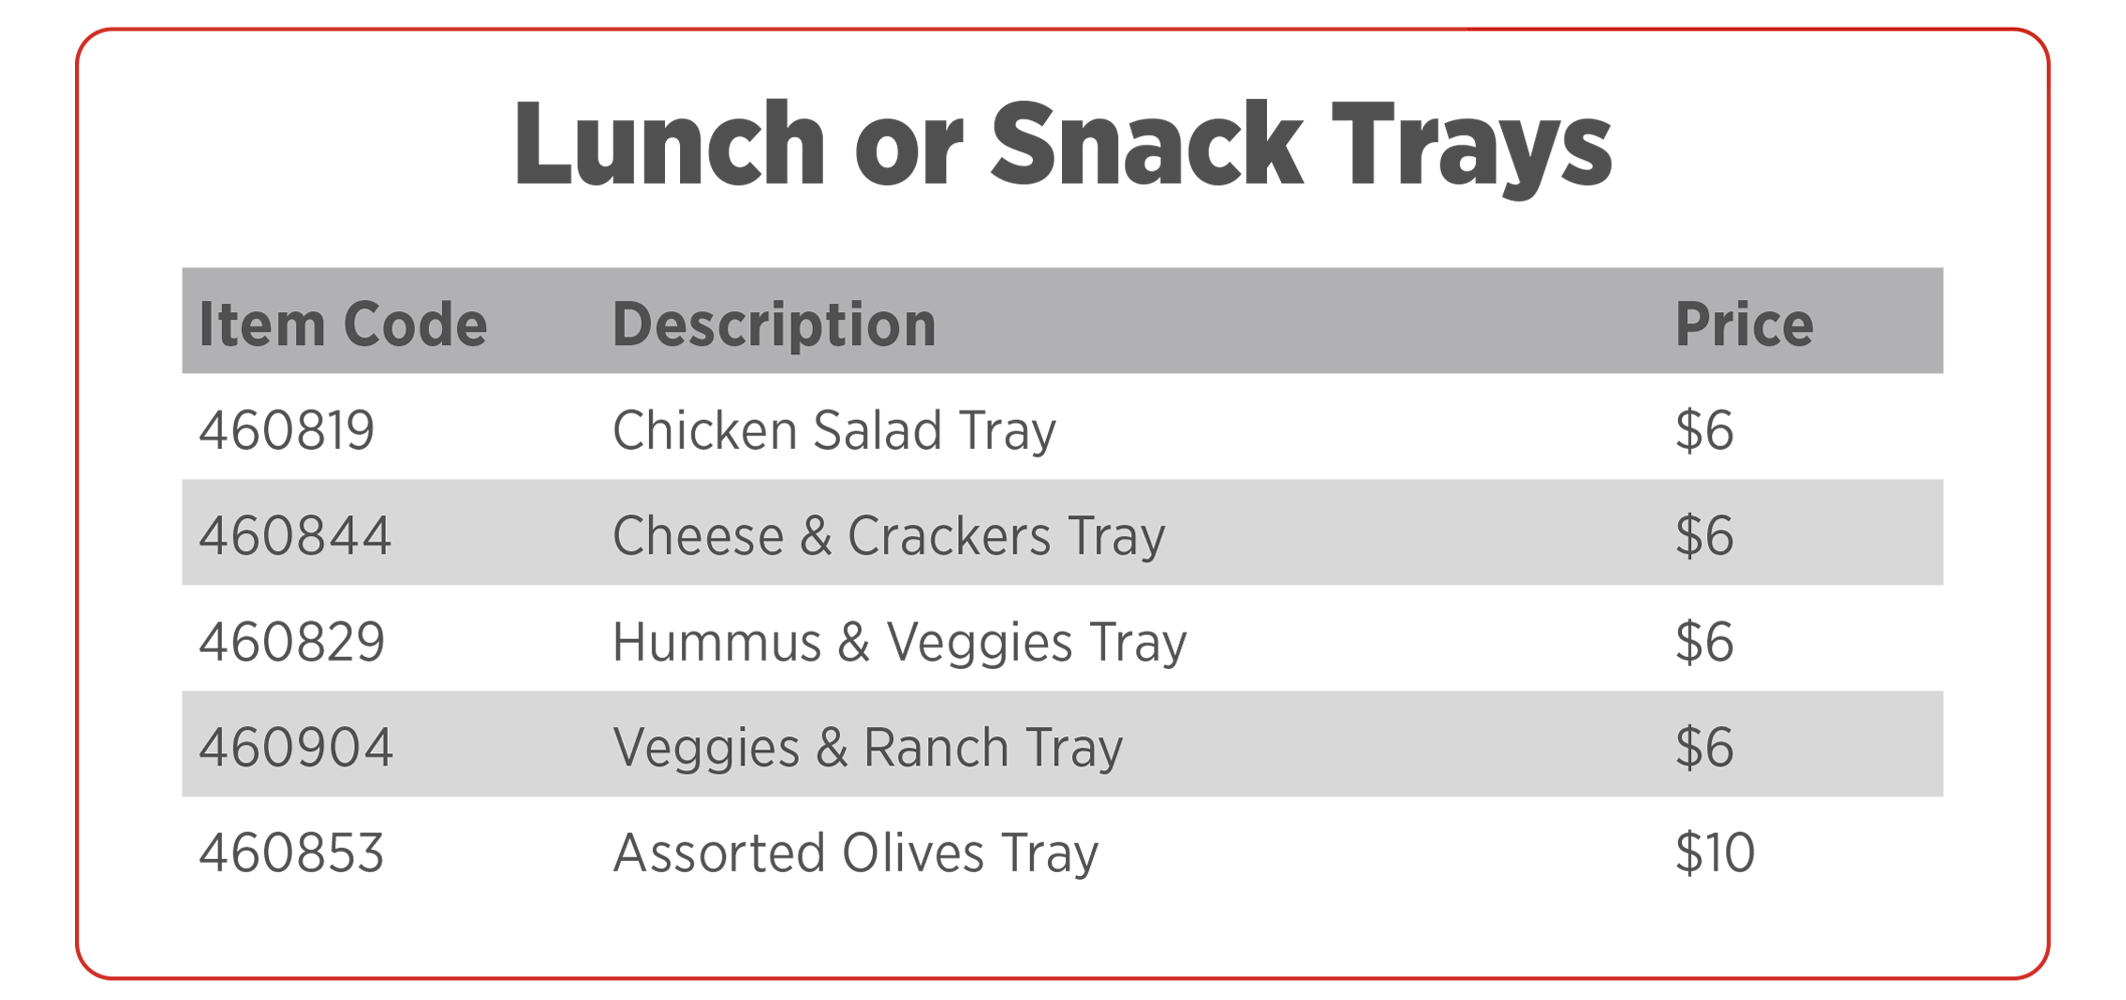 Lunch or Snack Trays - Chicken Salad - Cheese and Crackers - Veggies - Olives